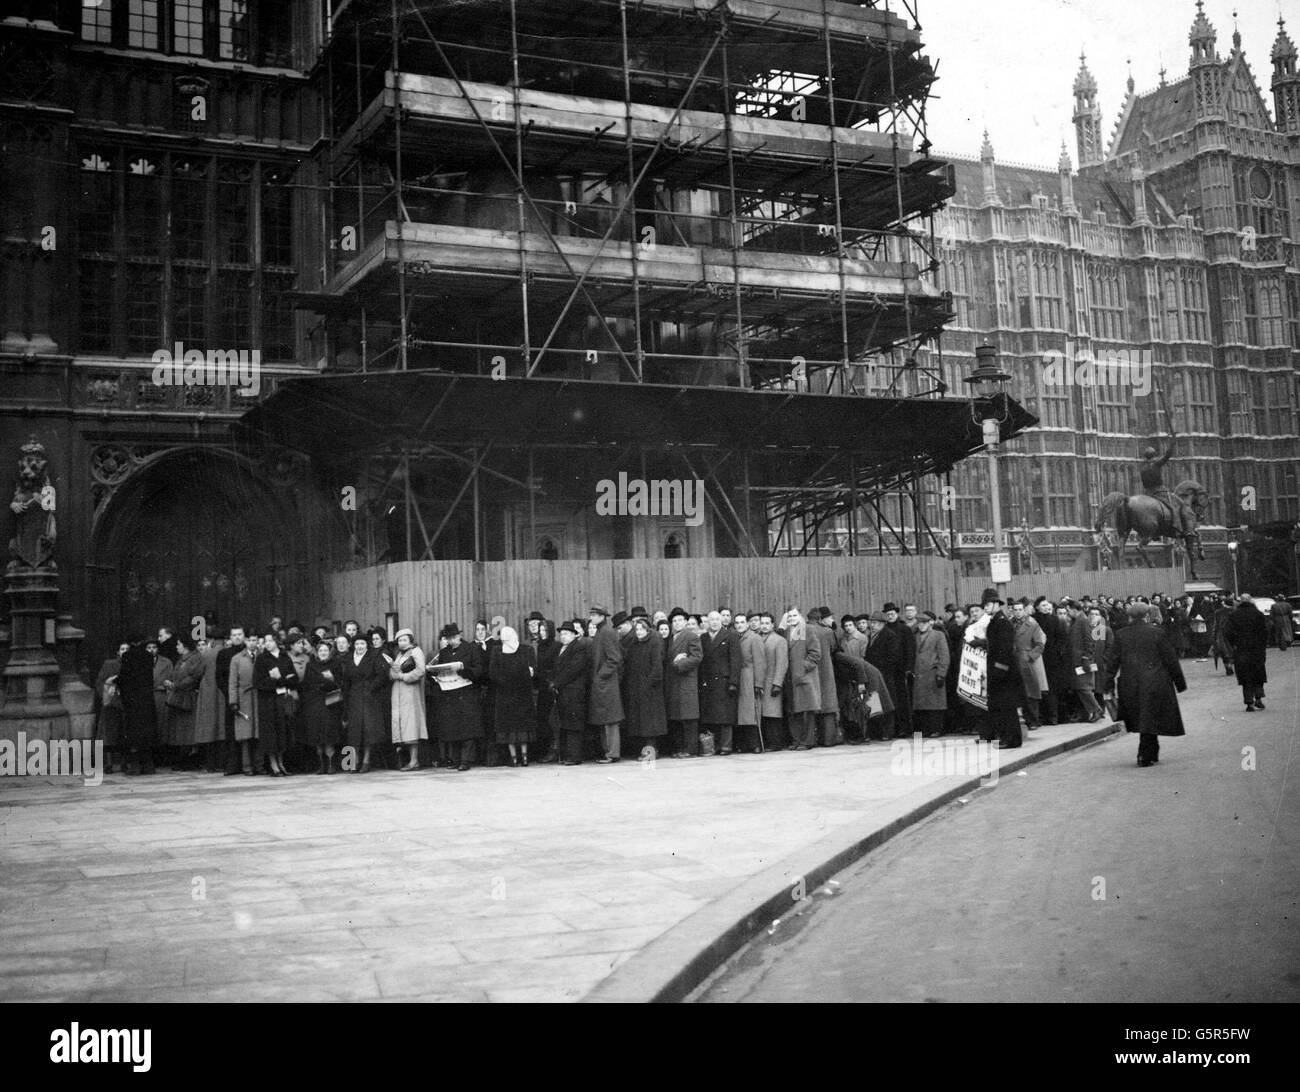 Crowds of people gathering at the St Stephen's entrance to pay homage to the coffin of King George VI lying in state at Westminster Hall, London. Stock Photo